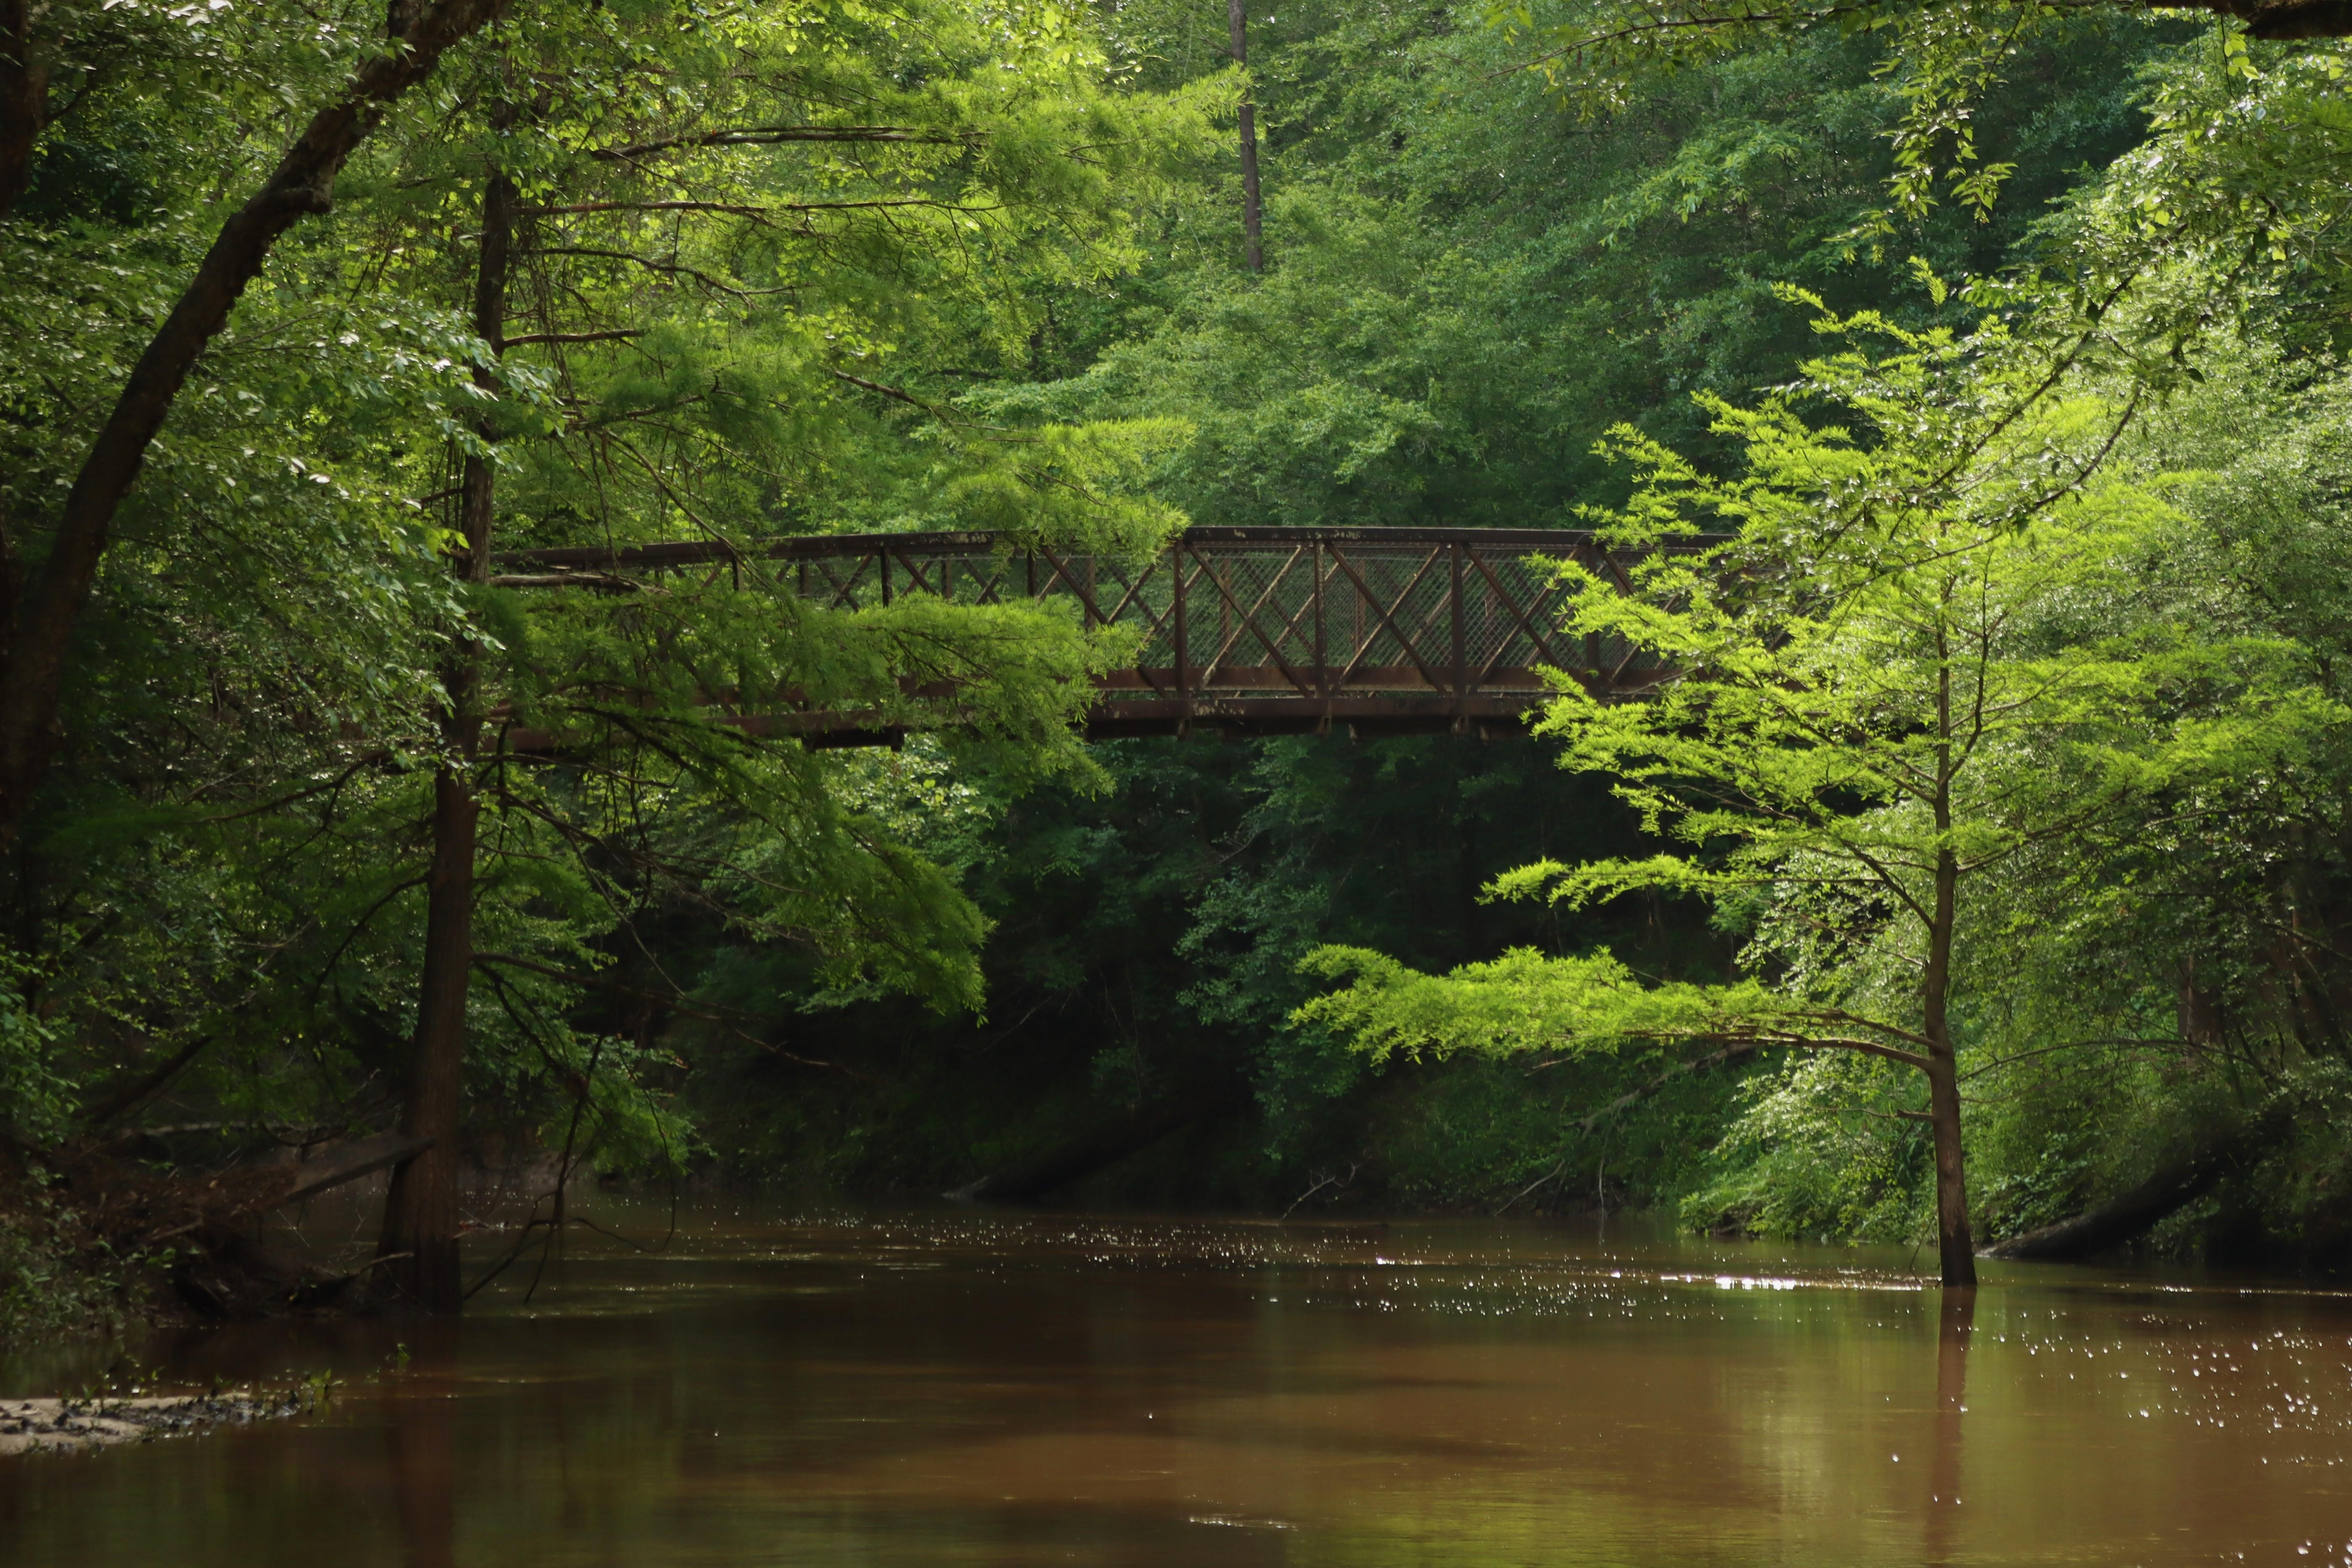 An iron bridge above a murky creek surrounded by dense woods.